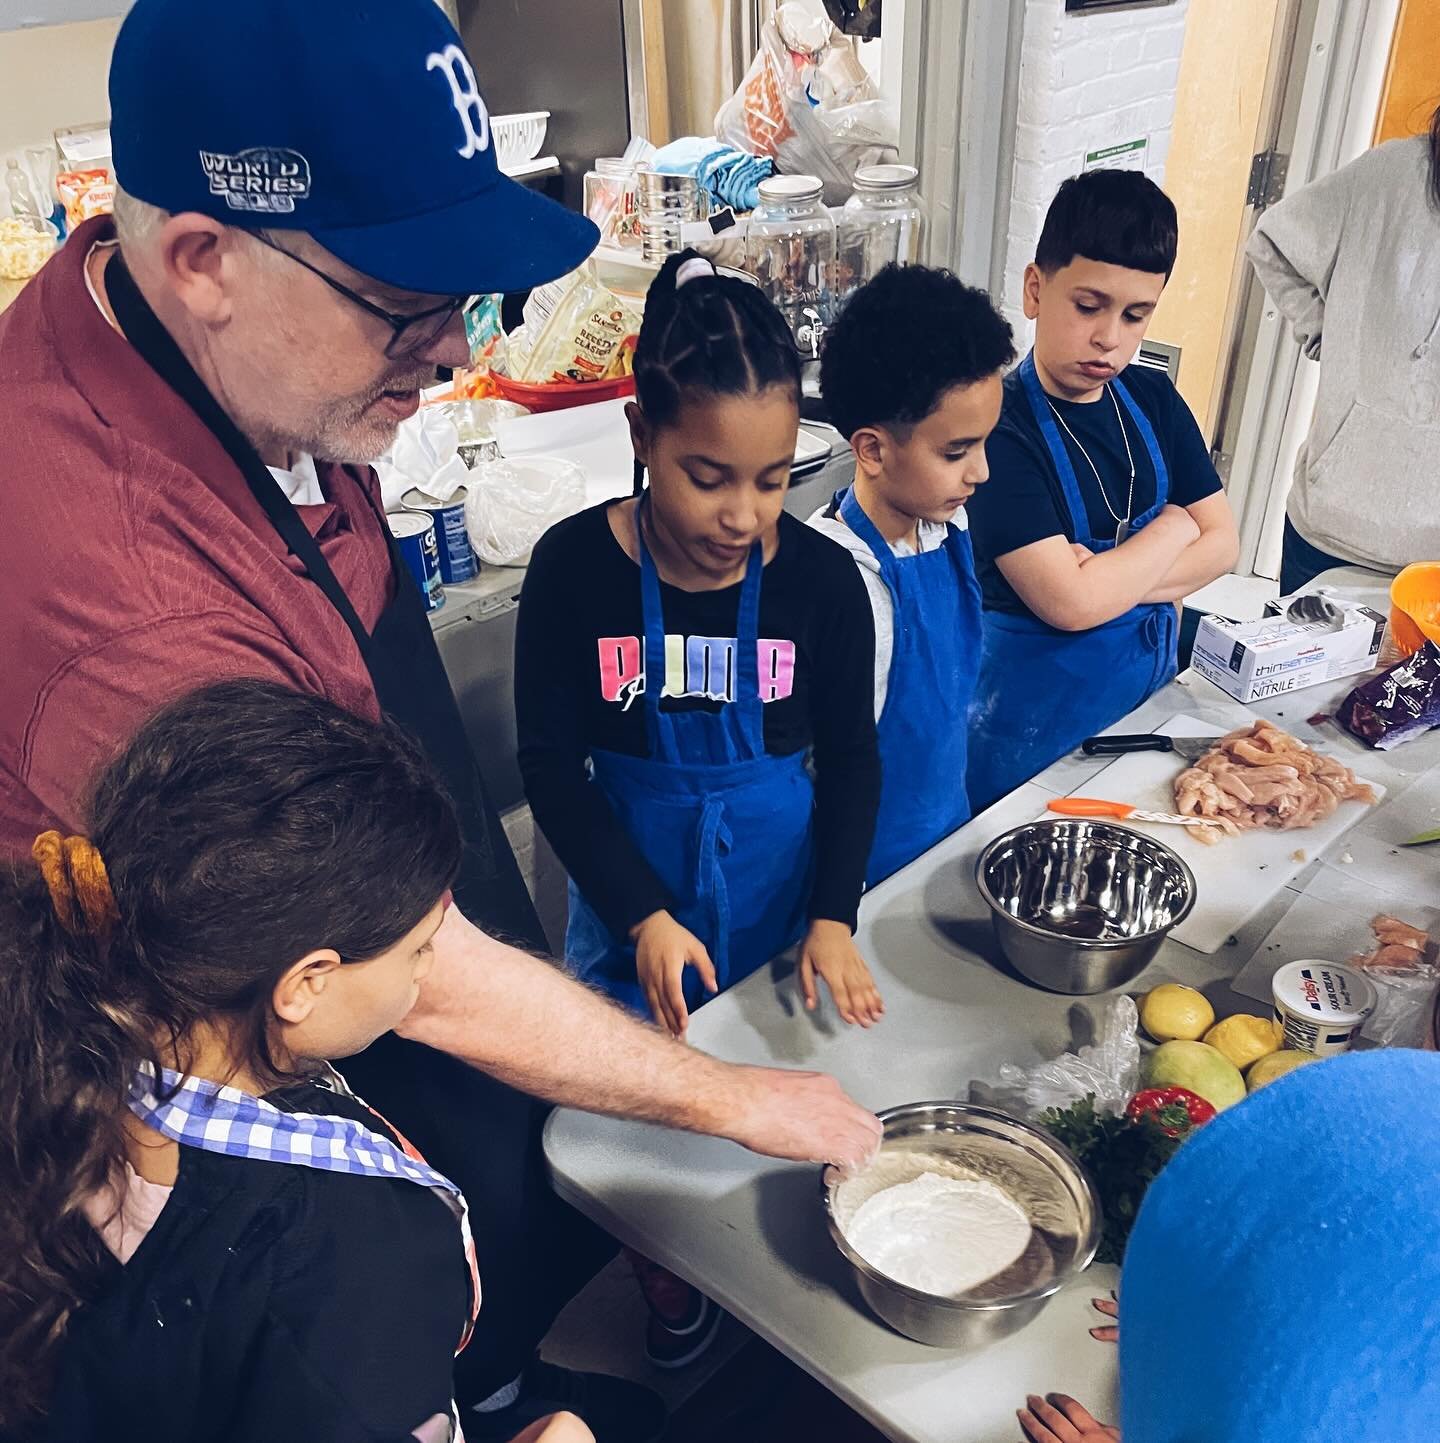 Students from Parker Elementary put their culinary skills to the test by making Breaded Chicken Tenders and Black Bean Mango Salad with Chef Devin Byrnes, owner of Destination Soups! Thanks so much Devin for teaching our young chefs 🍗🥗! #FoodforTho